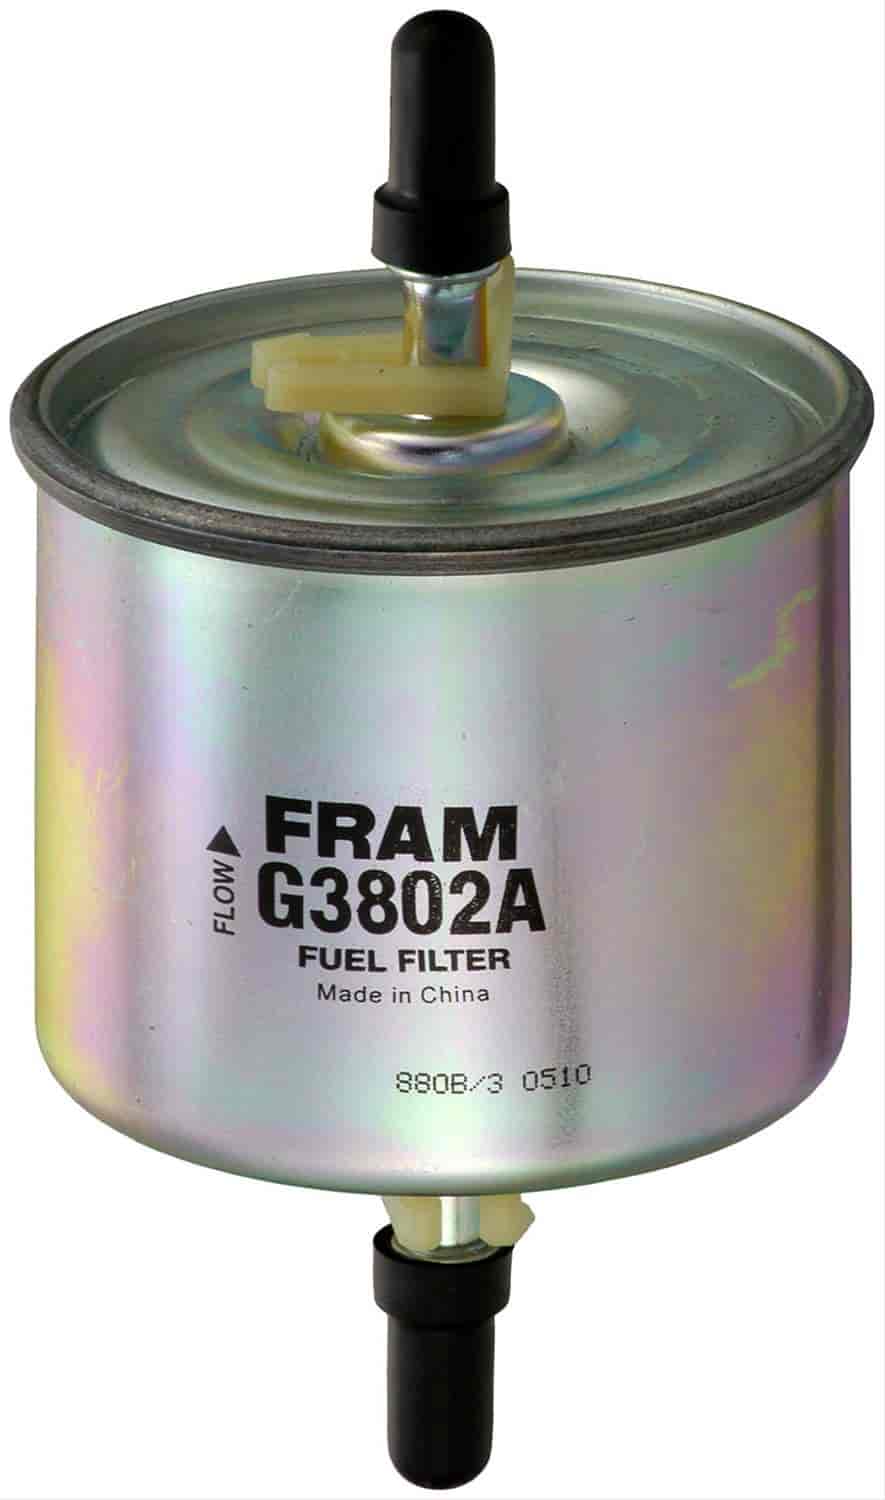 Inline Fuel Filter for Select Ford, Select Isuzu, Select Lincoln, Select Mazda, Select Mercury, Select Merkur